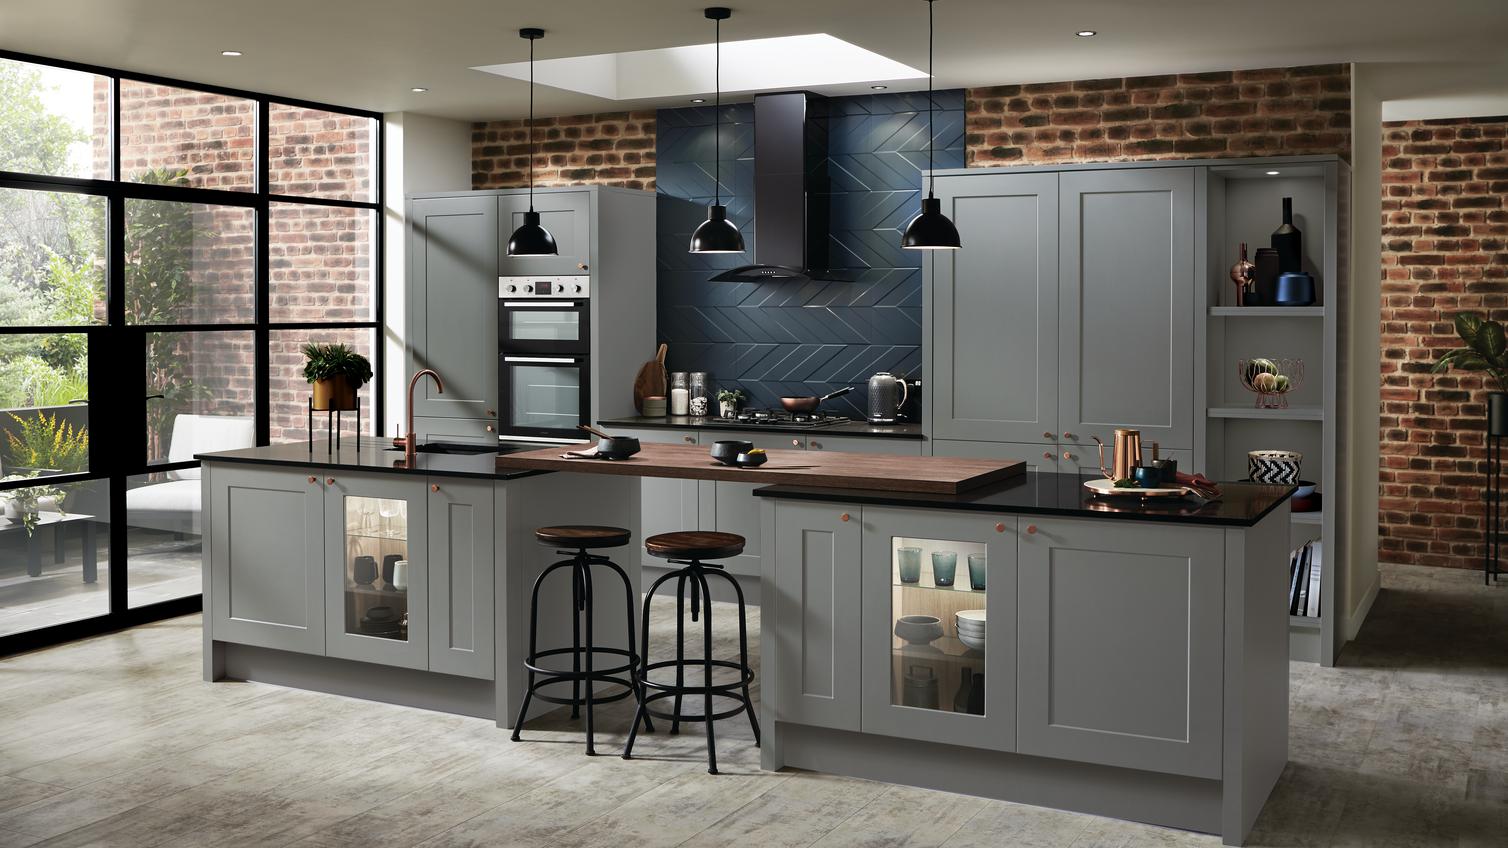 Sophisticated slate grey kitchen with a double island layout. Featuring exposed brick, dark wood tones and black accessories.